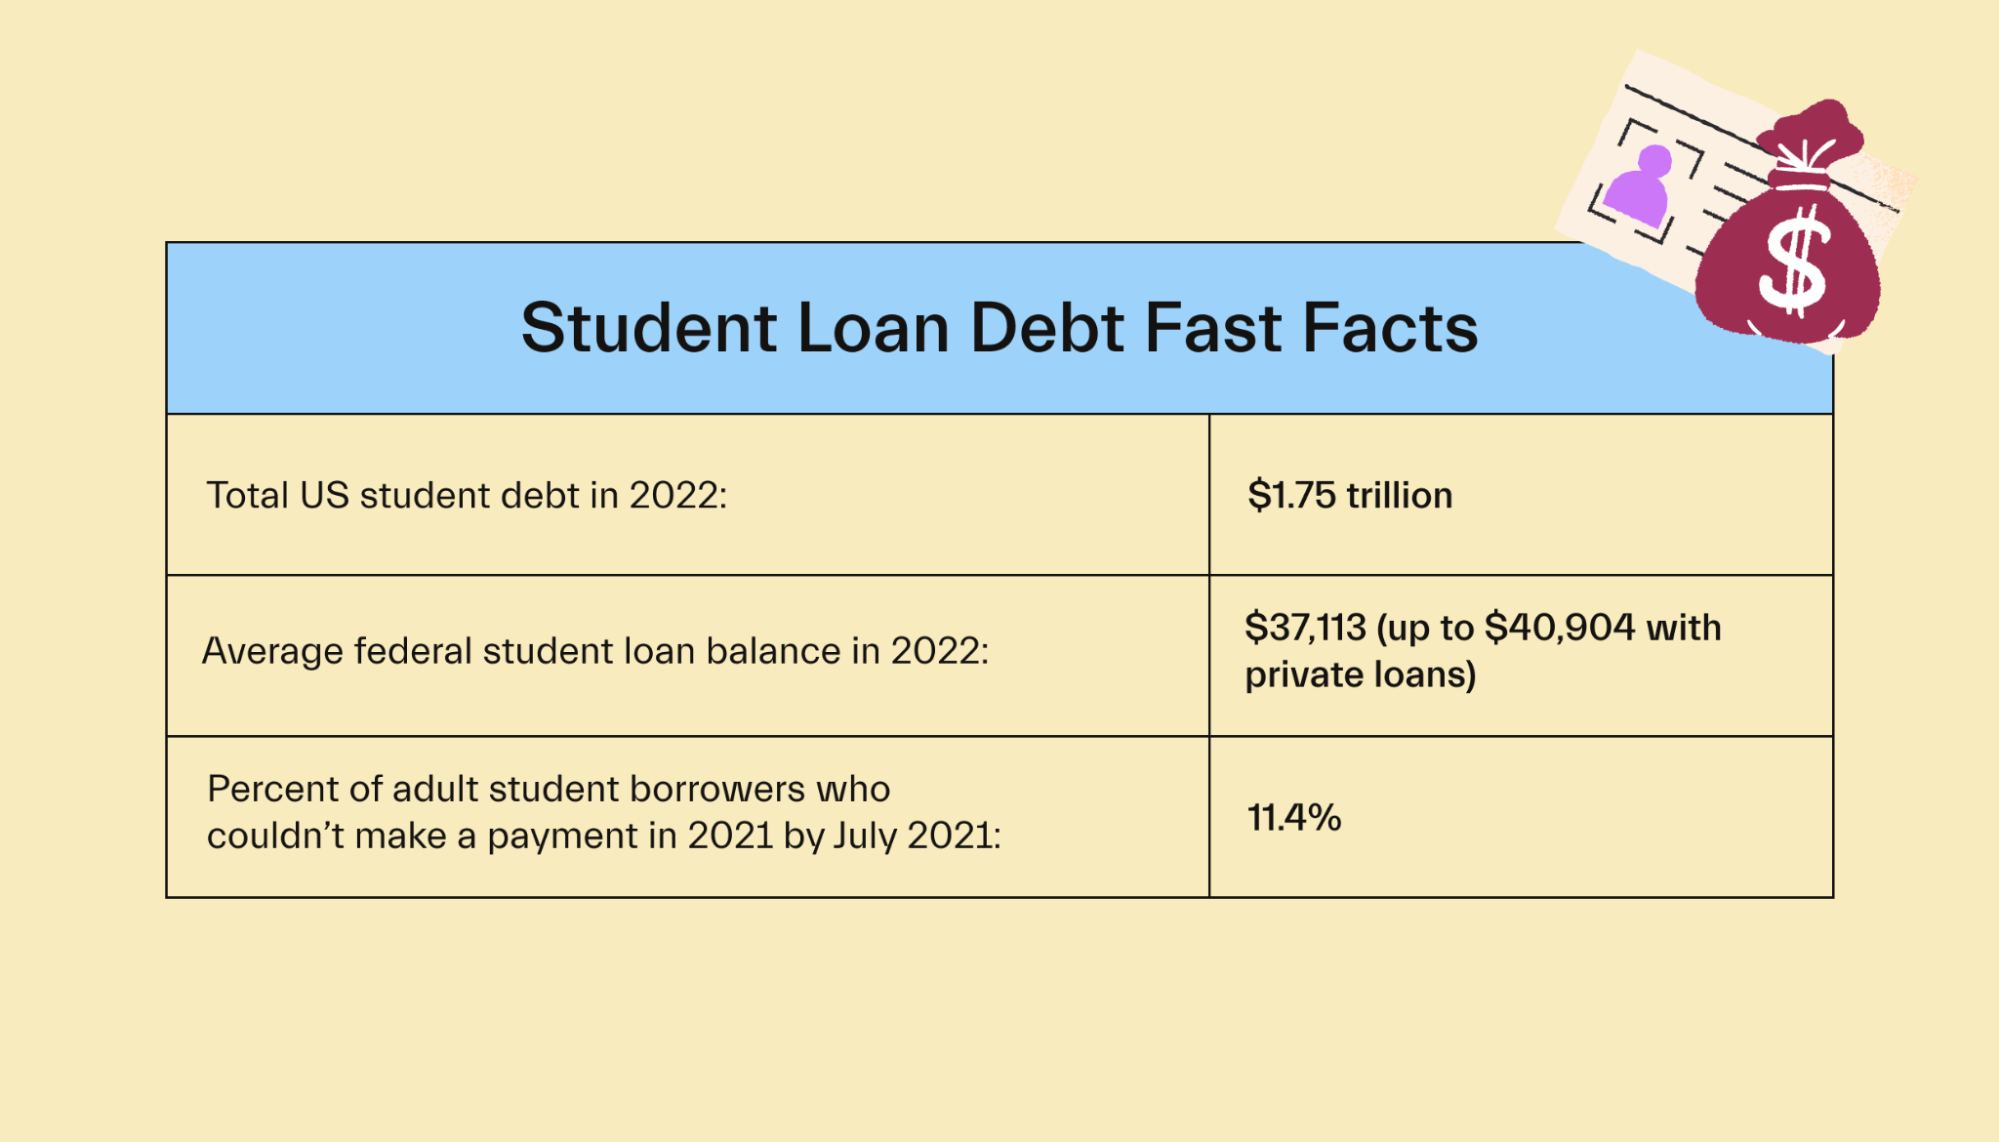 Student Loan Debt Facts